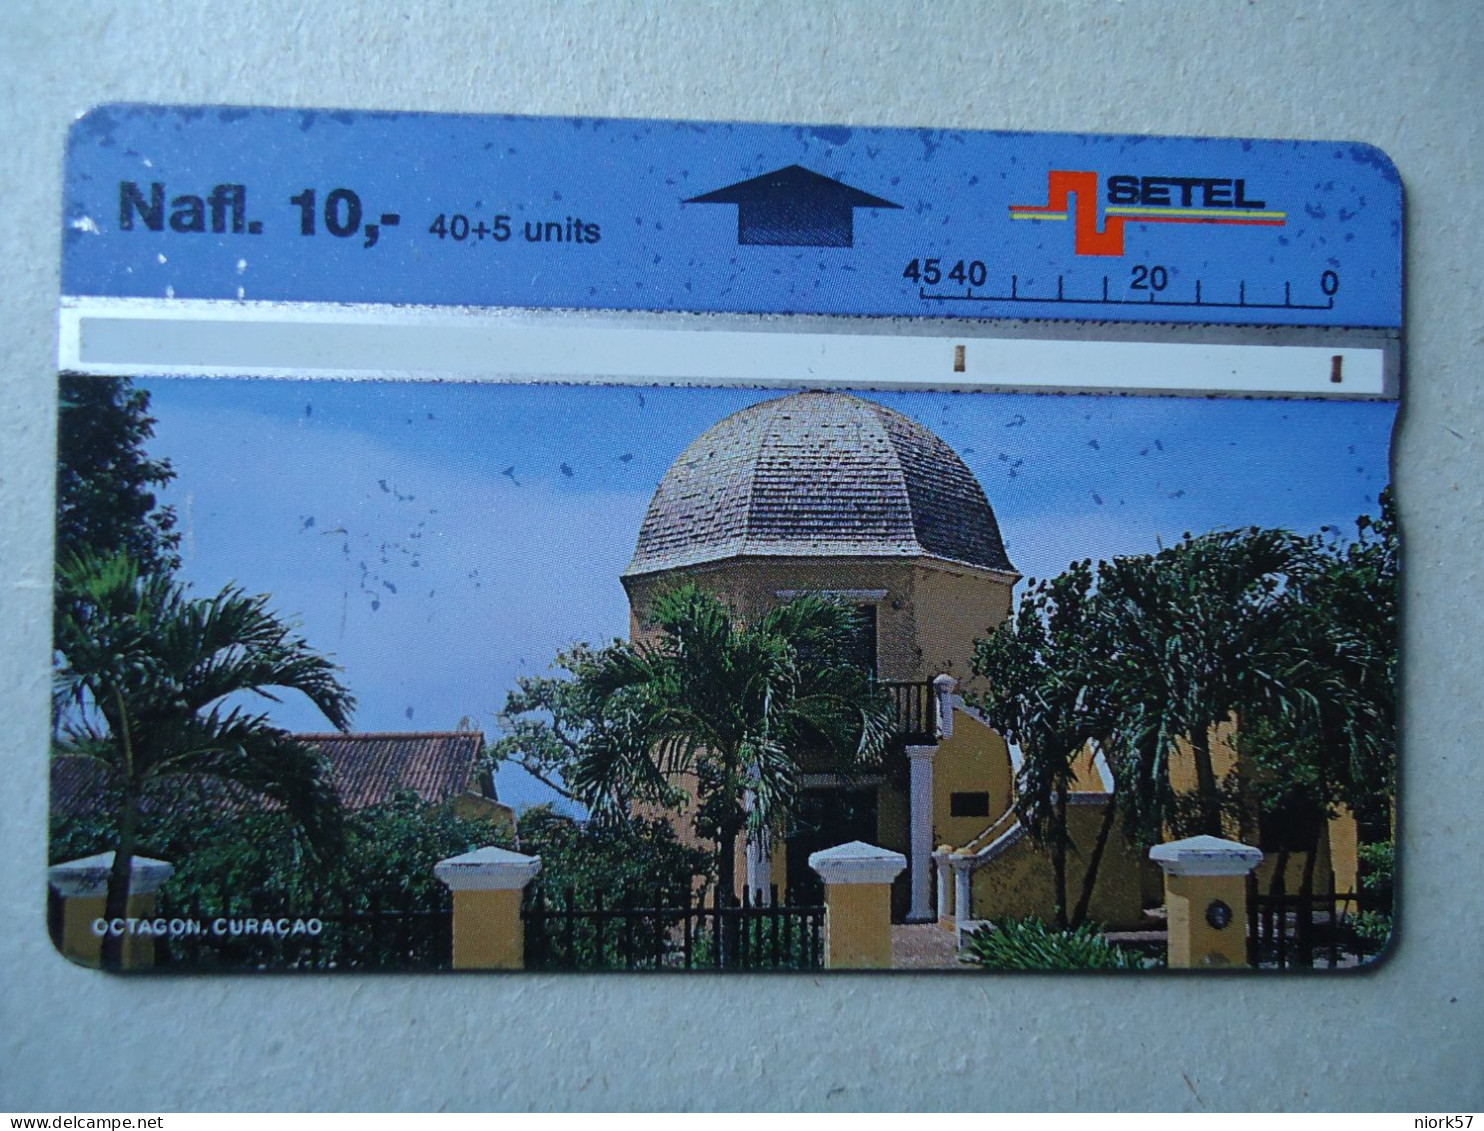 CURACAO ANTILLES USED CARDS  MONUMENTS - Antillen (Overige)